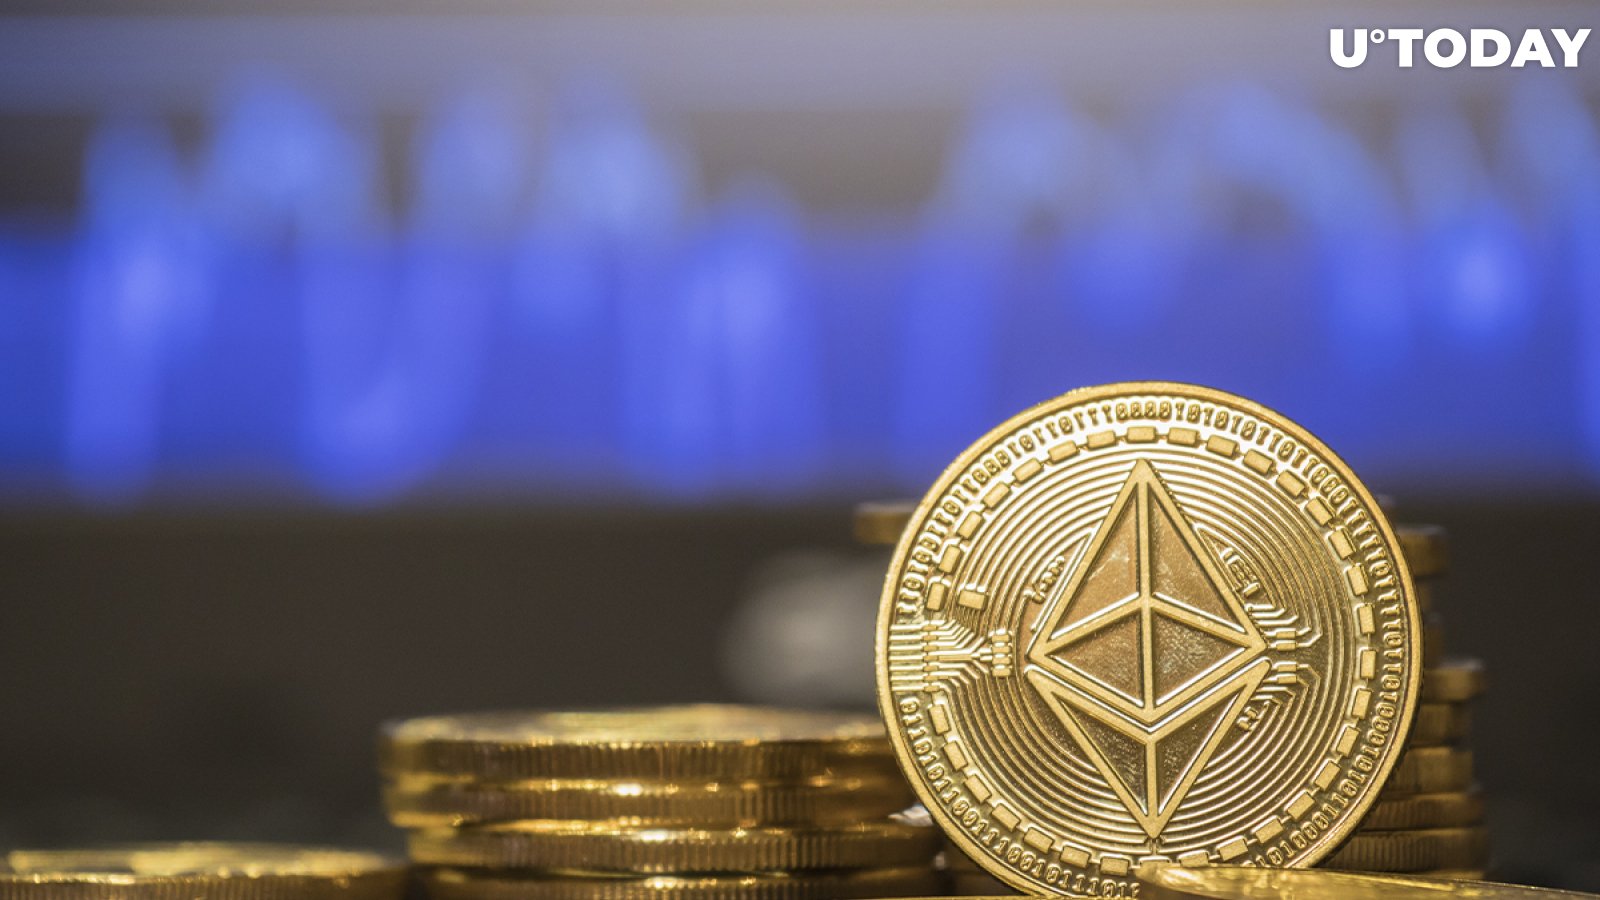 Ethereum to Become Basis for Digital Shekel: Bloomberg